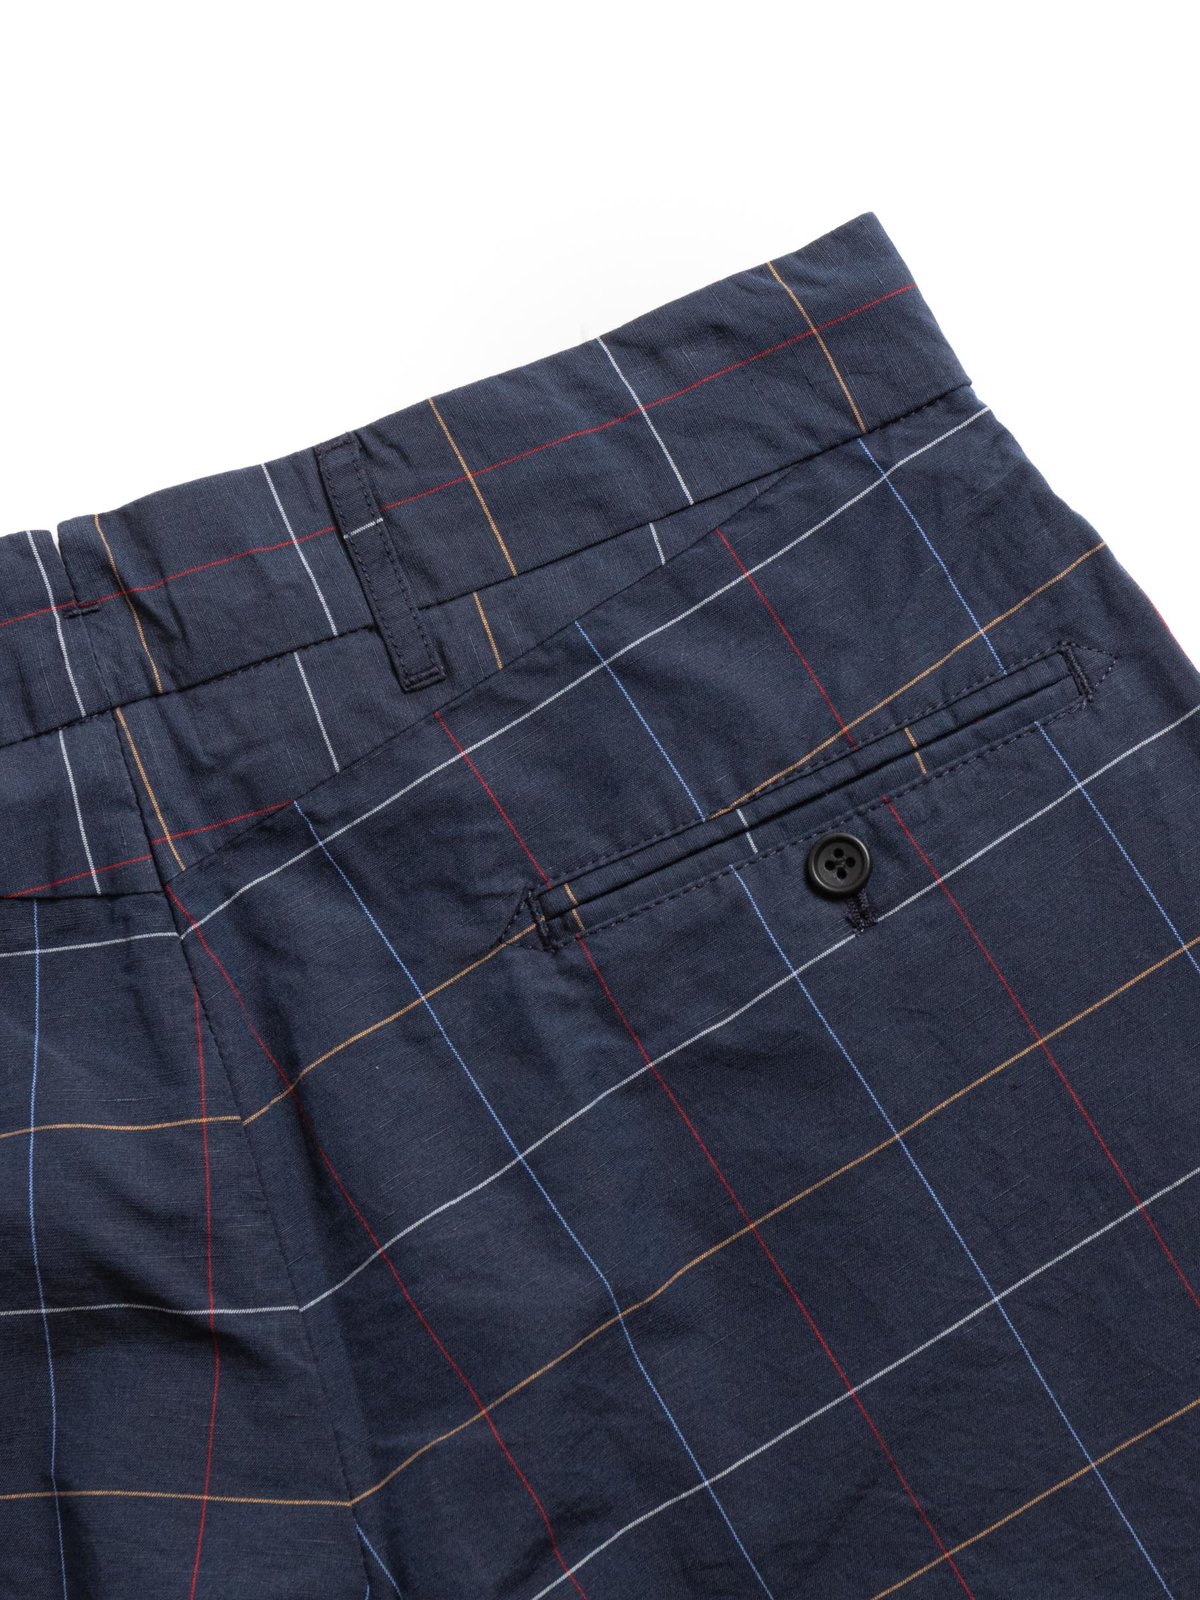 ANDOVER PANT NAVY CL WINDOWPANE - Image 5